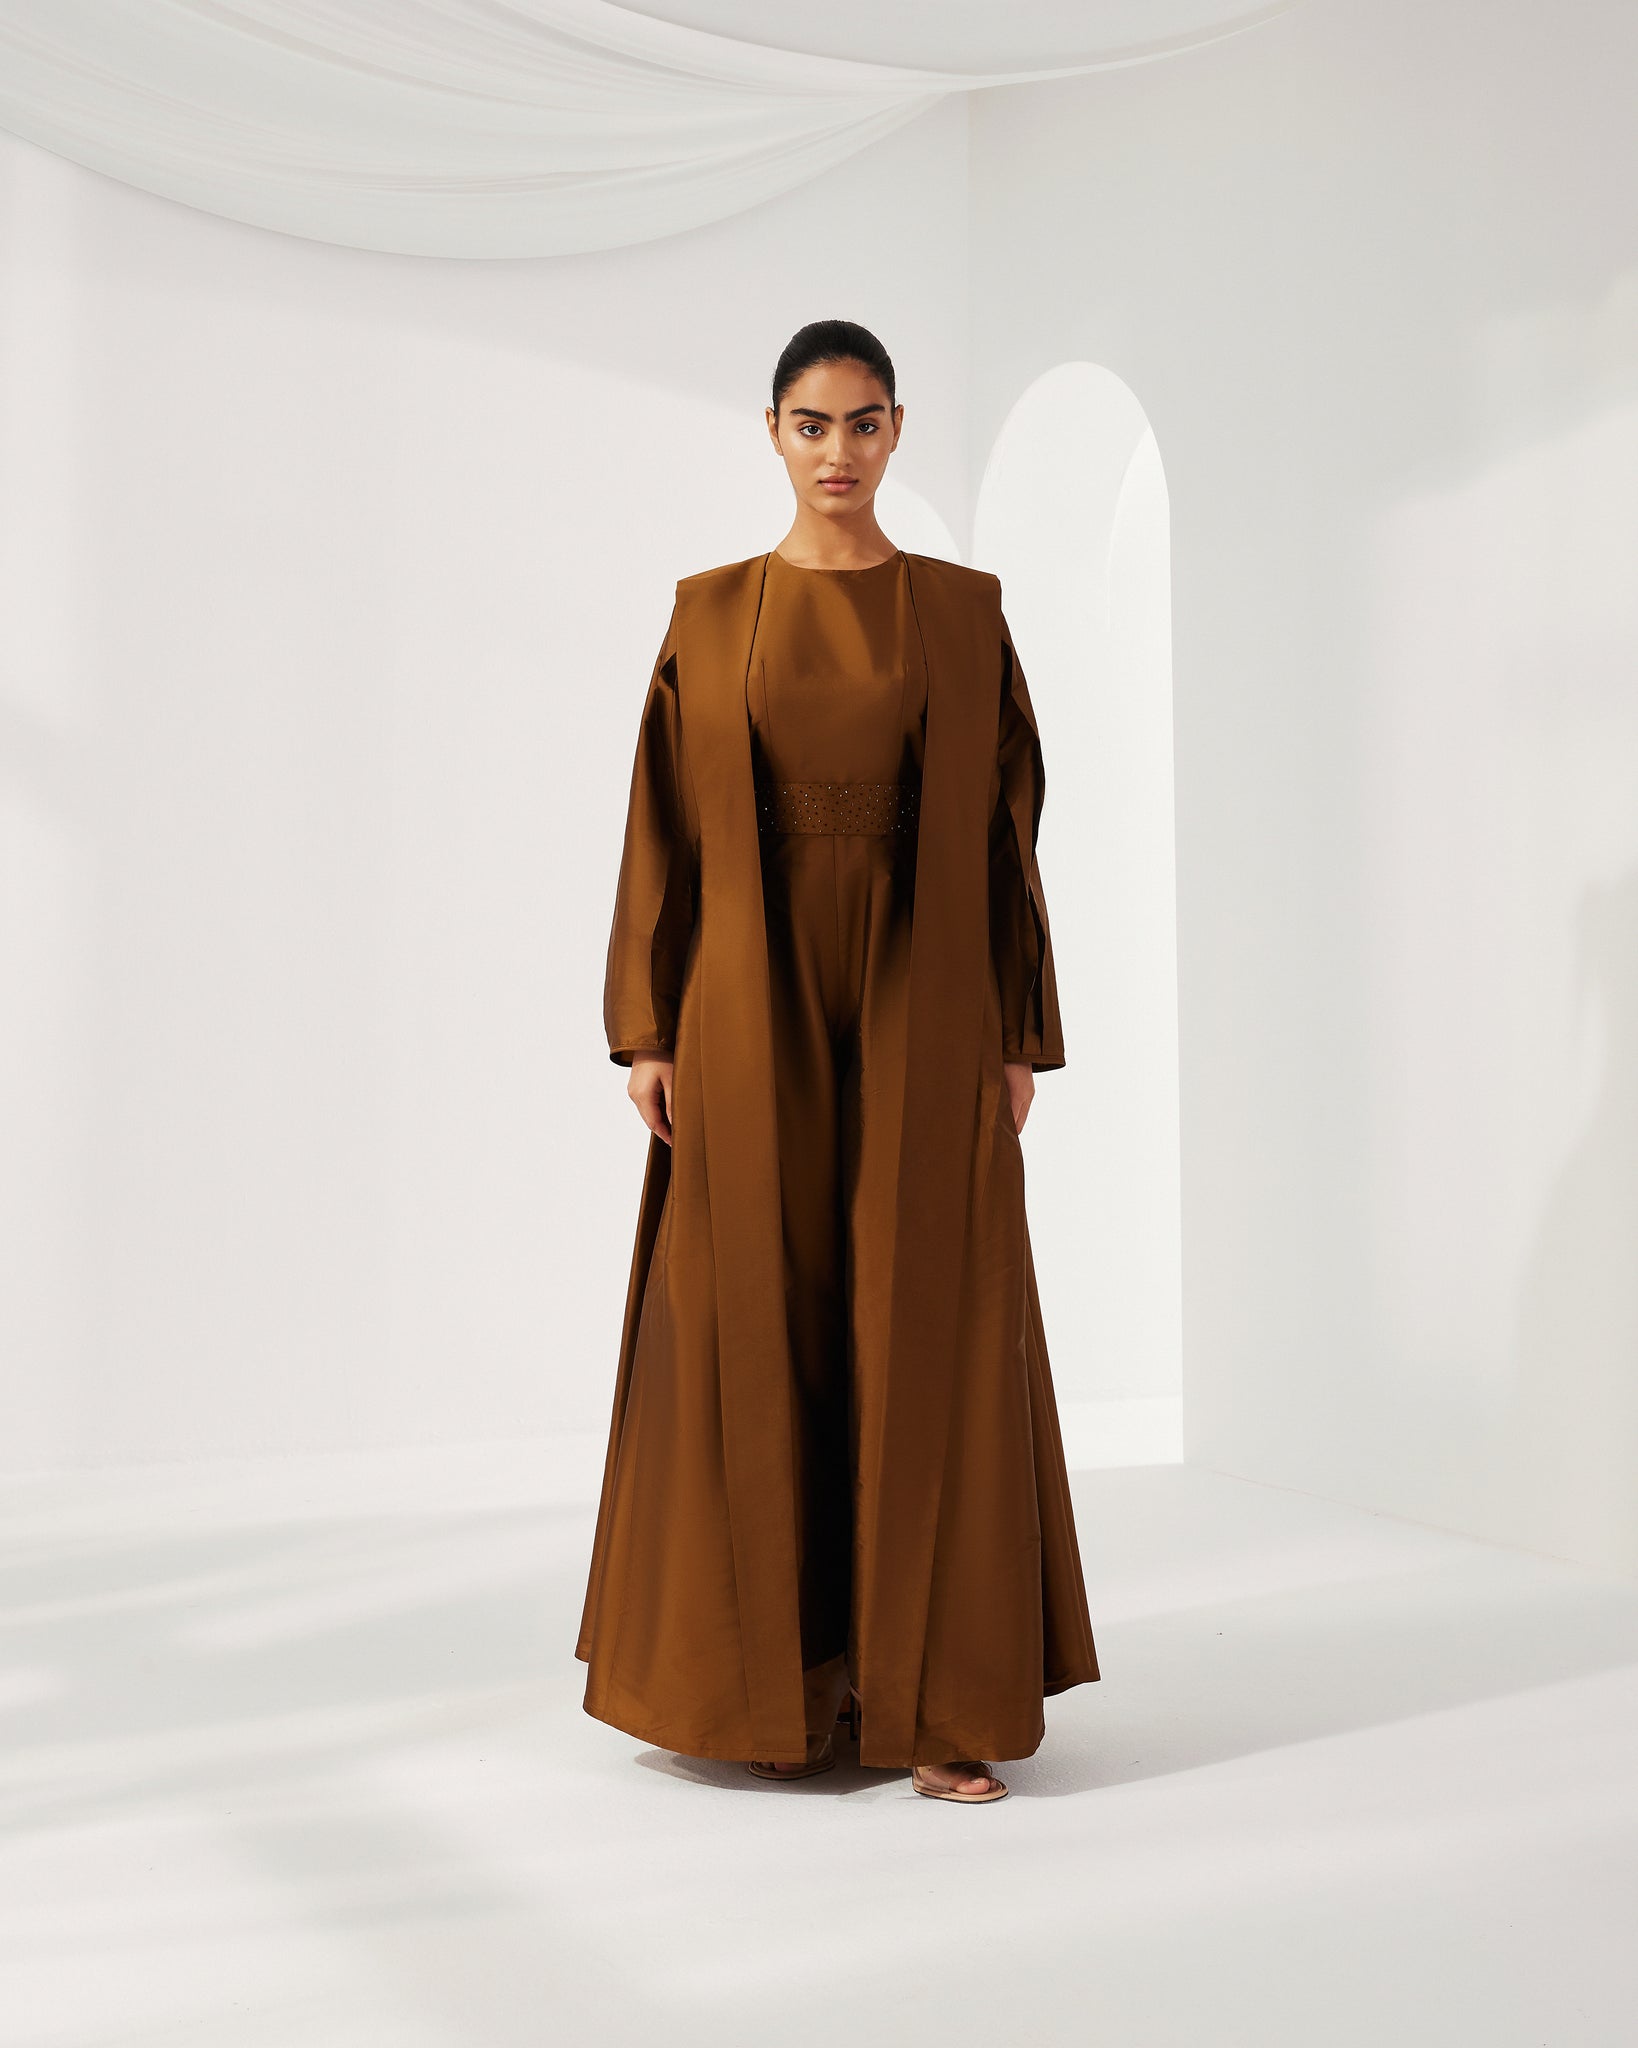 BROWN TAFFETA ABAYA WITH INNER JUMPSUIT AND EMBROIDERED BELT